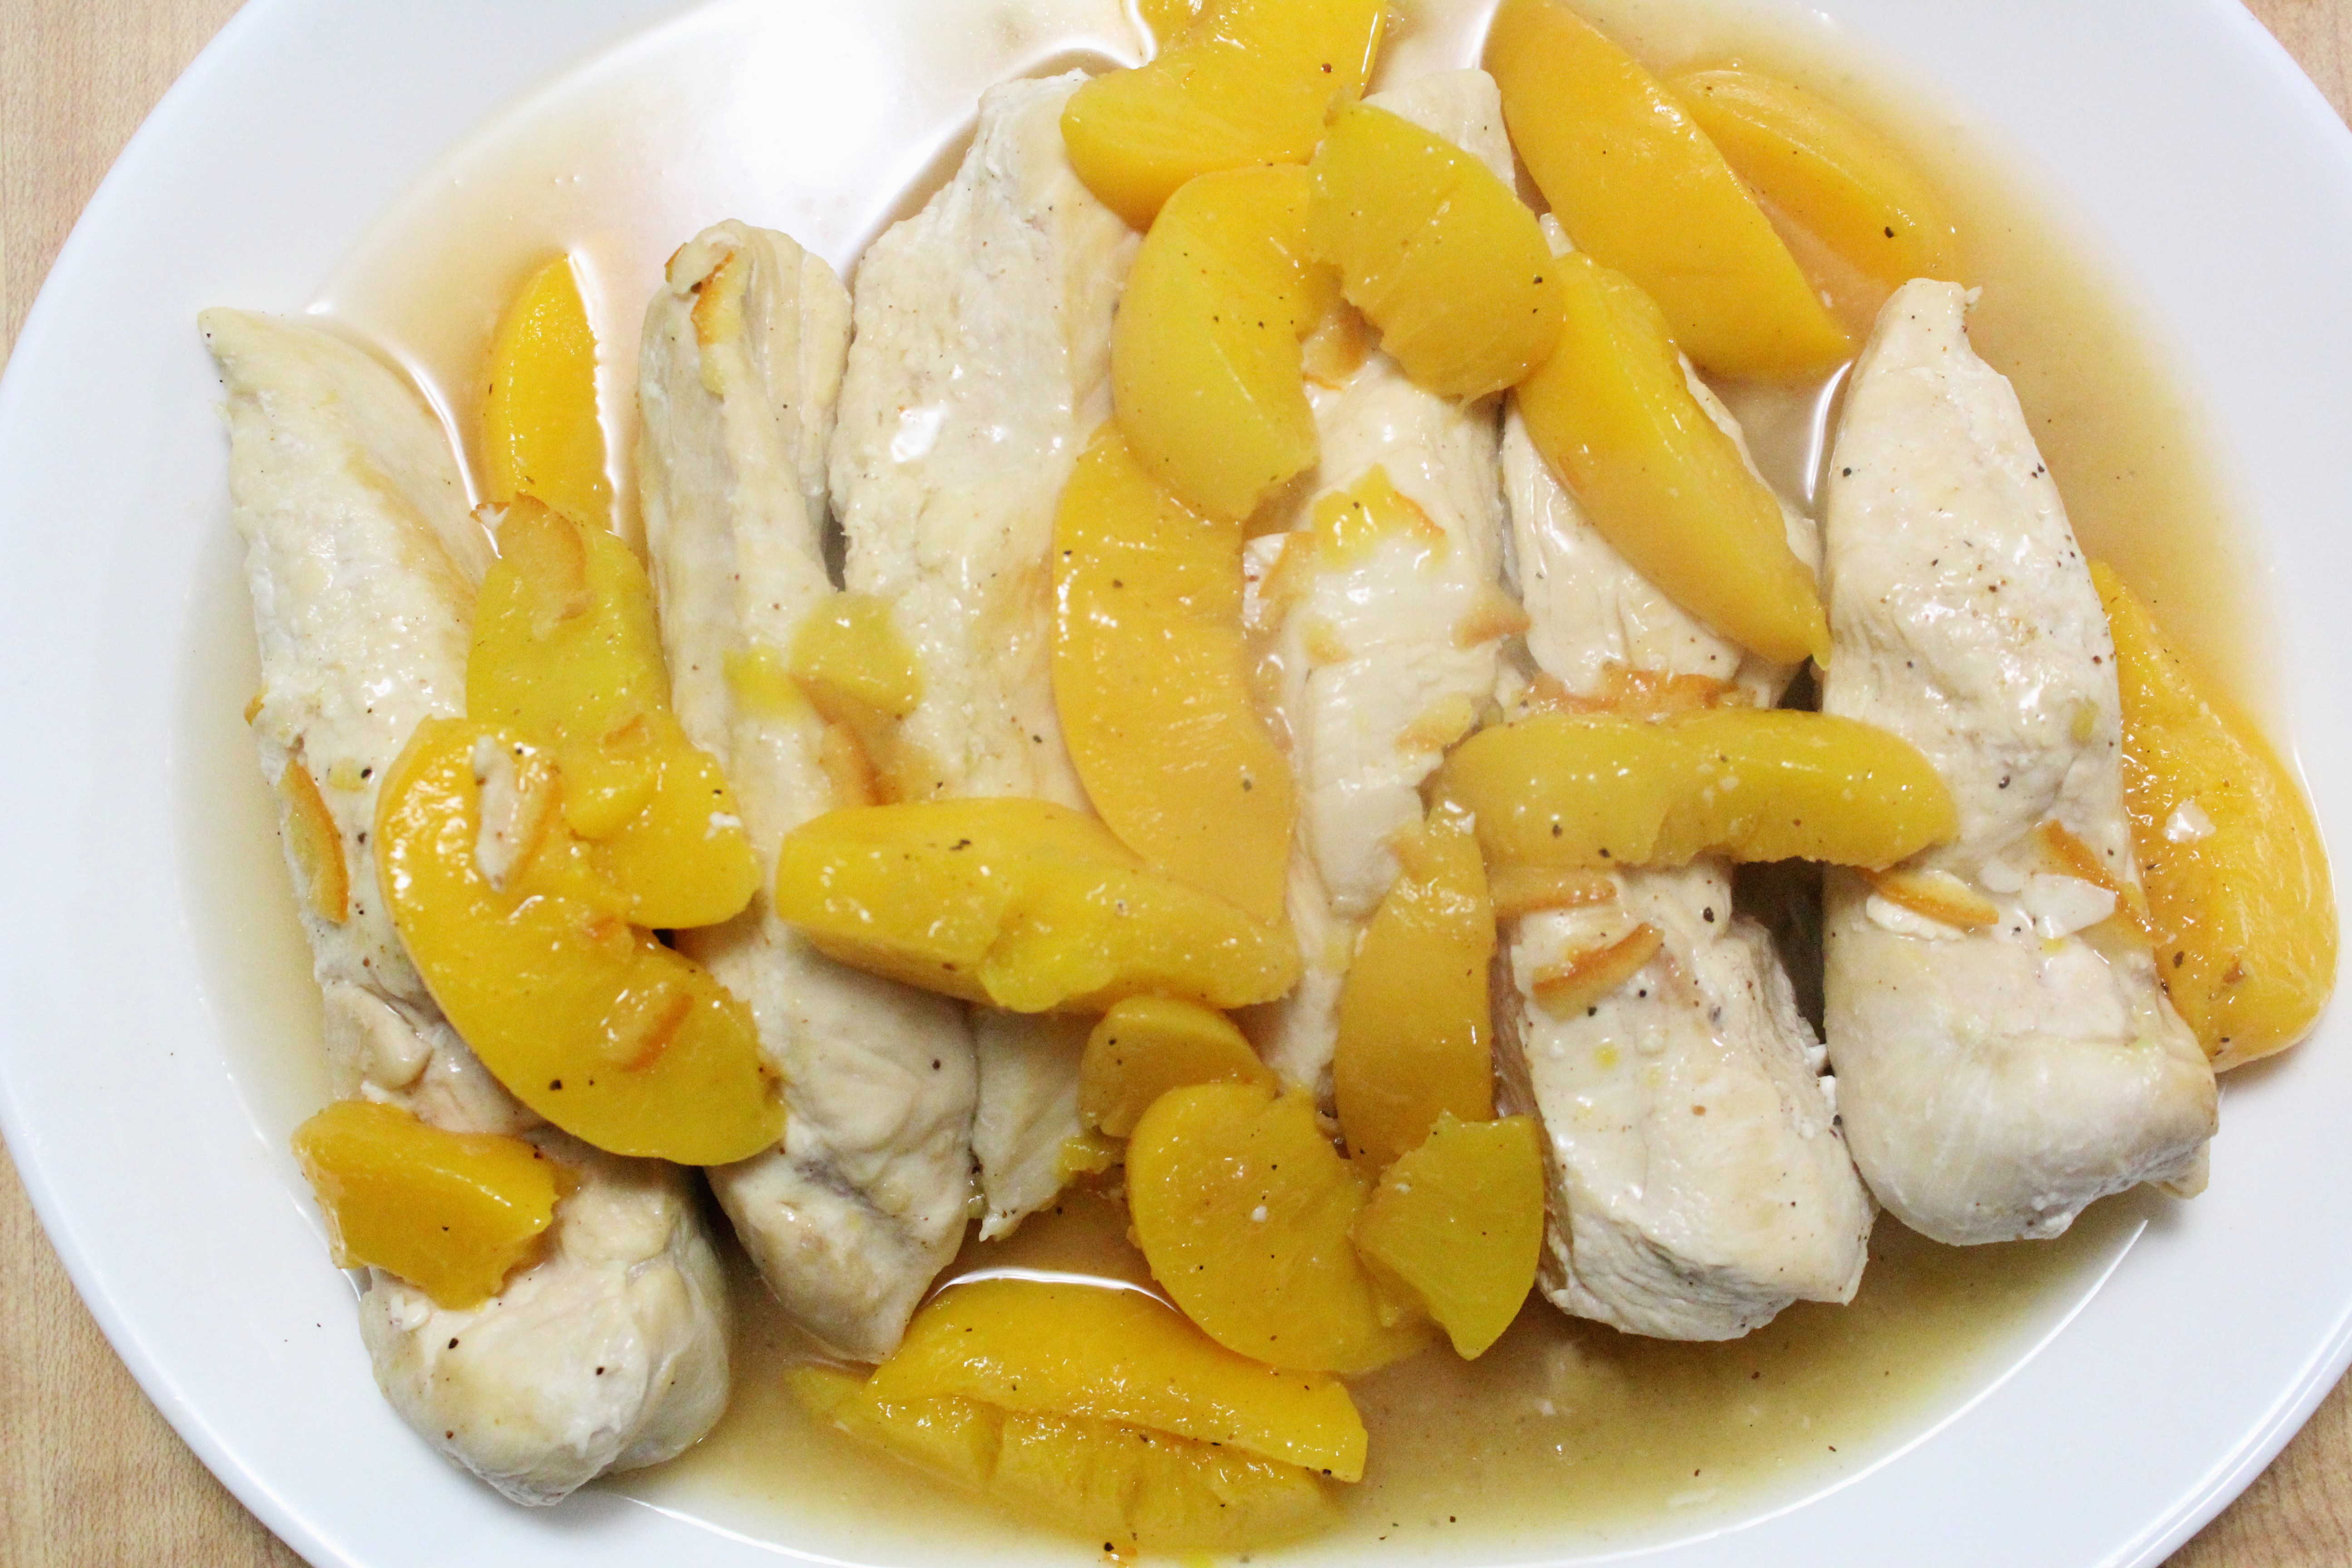 Looking for a quick, healthy dish that is more than ordinary? Then check out this recipe for Chicken with Spiced Peaches @ http://wp.me/p7kAQb-mR